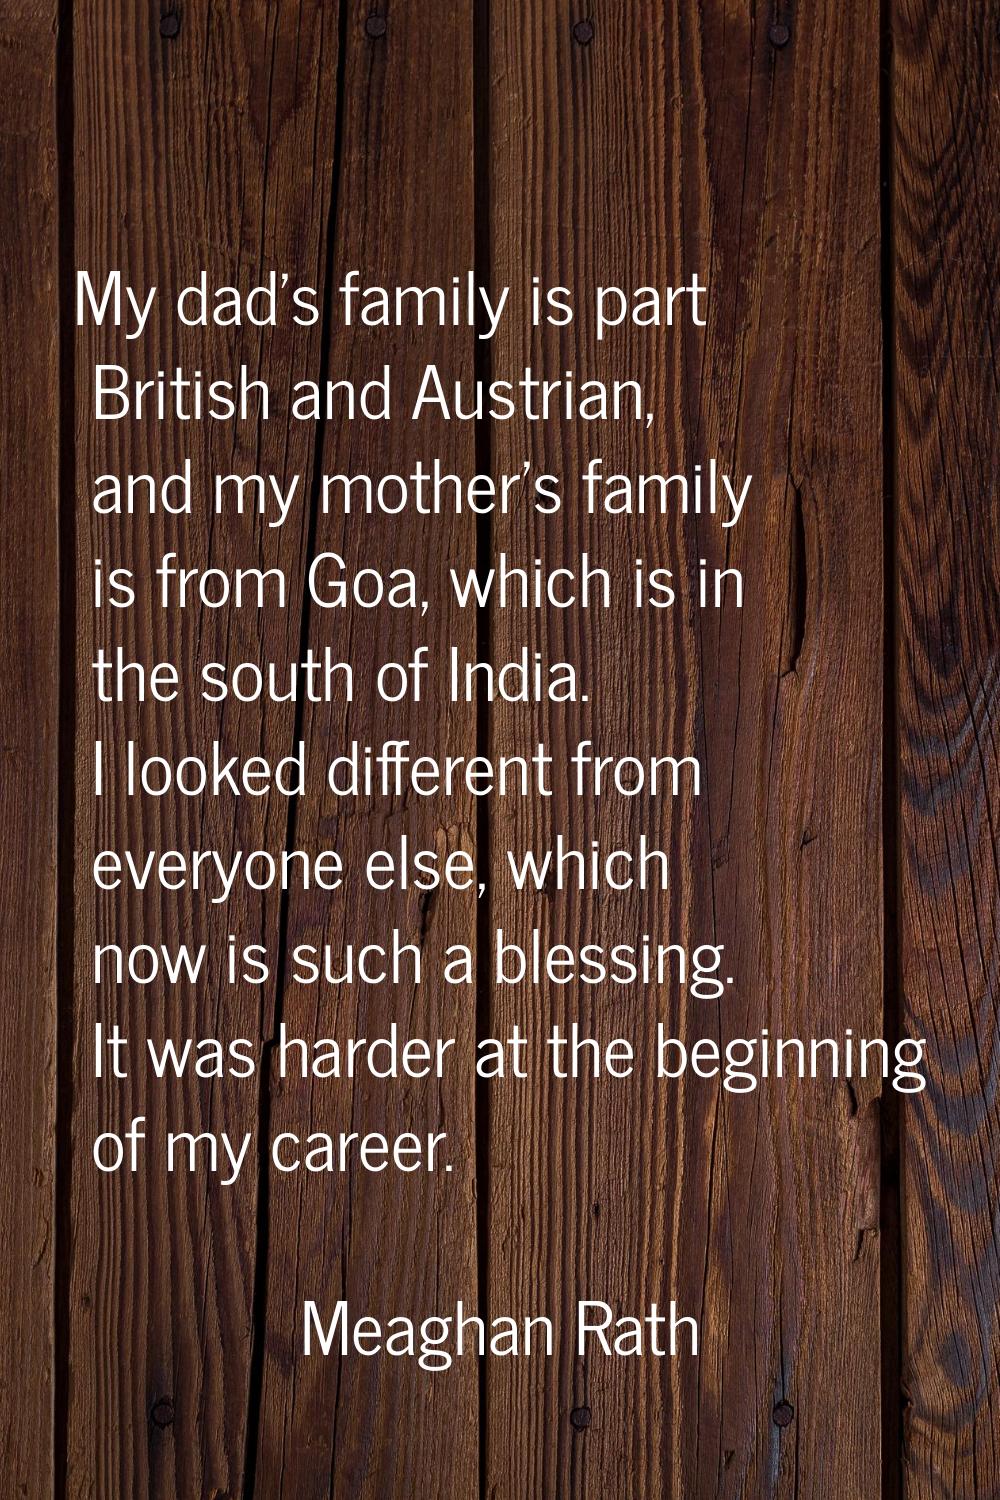 My dad's family is part British and Austrian, and my mother's family is from Goa, which is in the s